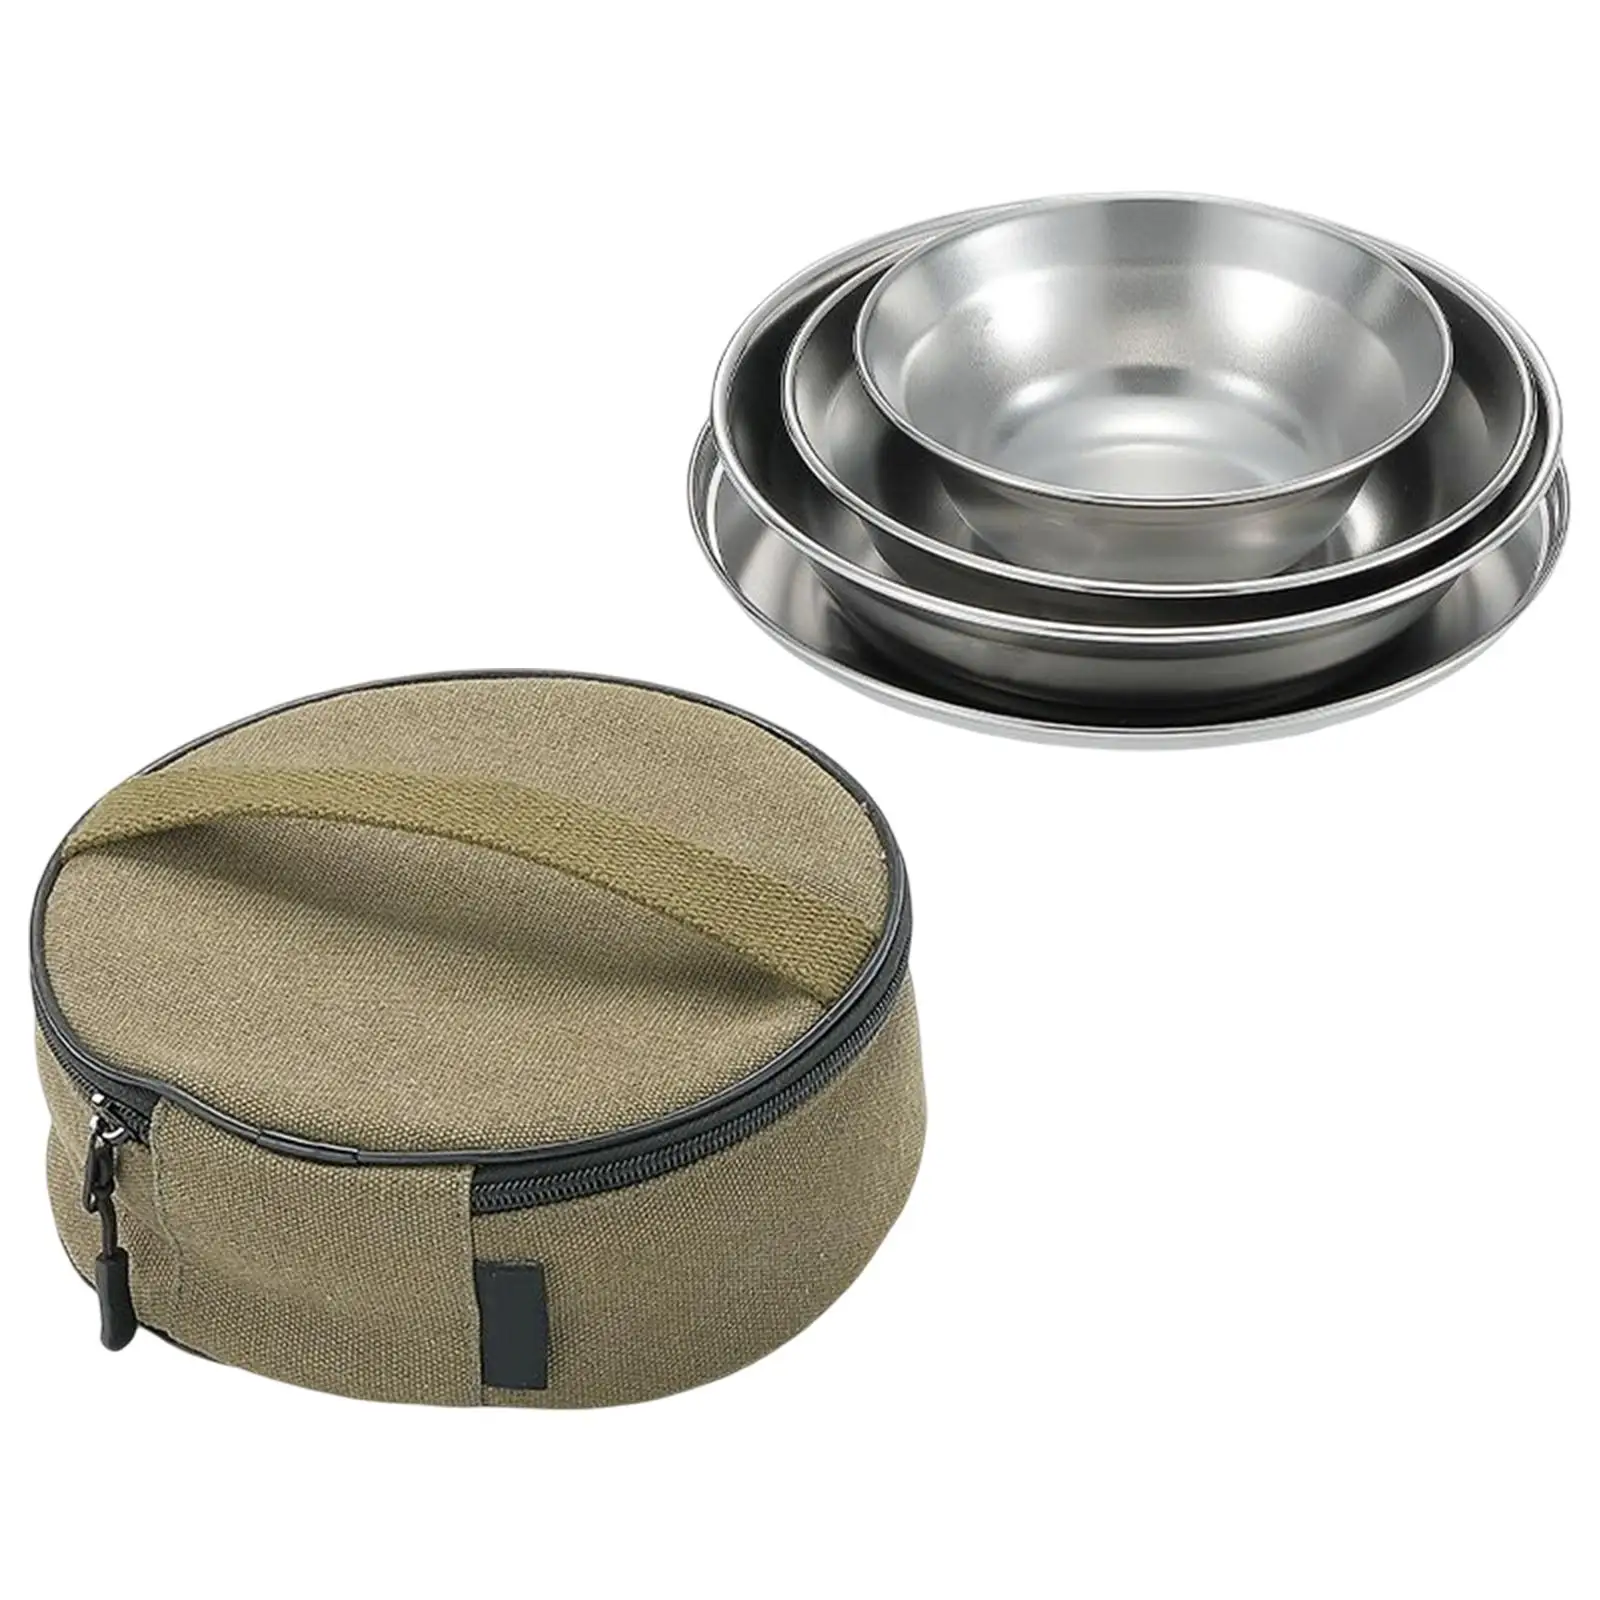 Portable Camping Tableware Set with Storage Bag Dinner Dish Cookware Dinnerware Soup Bowl Tray Kitchen Utensils for BBQ Picnic